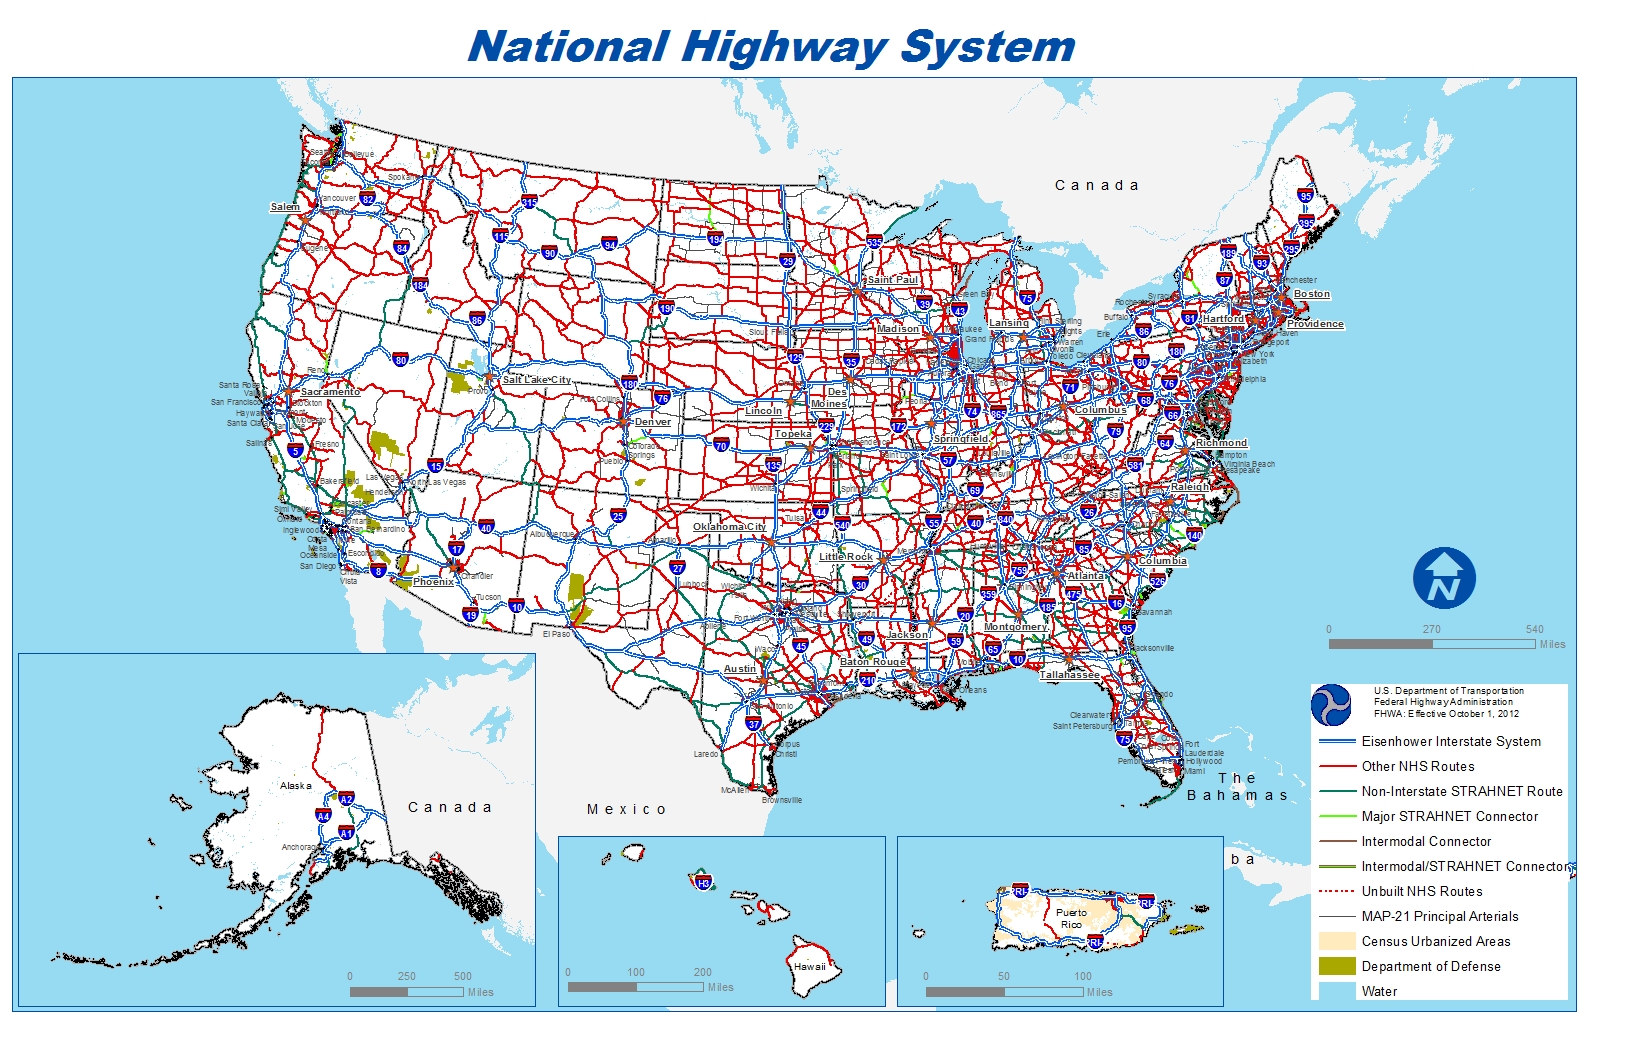 Small map of the NHS in the U.S. Access a PDF version of the entire NHS by clicking on this image. For a full text description of the NHS, see http://www.fhwa.dot.gov/planning/national_highway_system/nhs_maps/